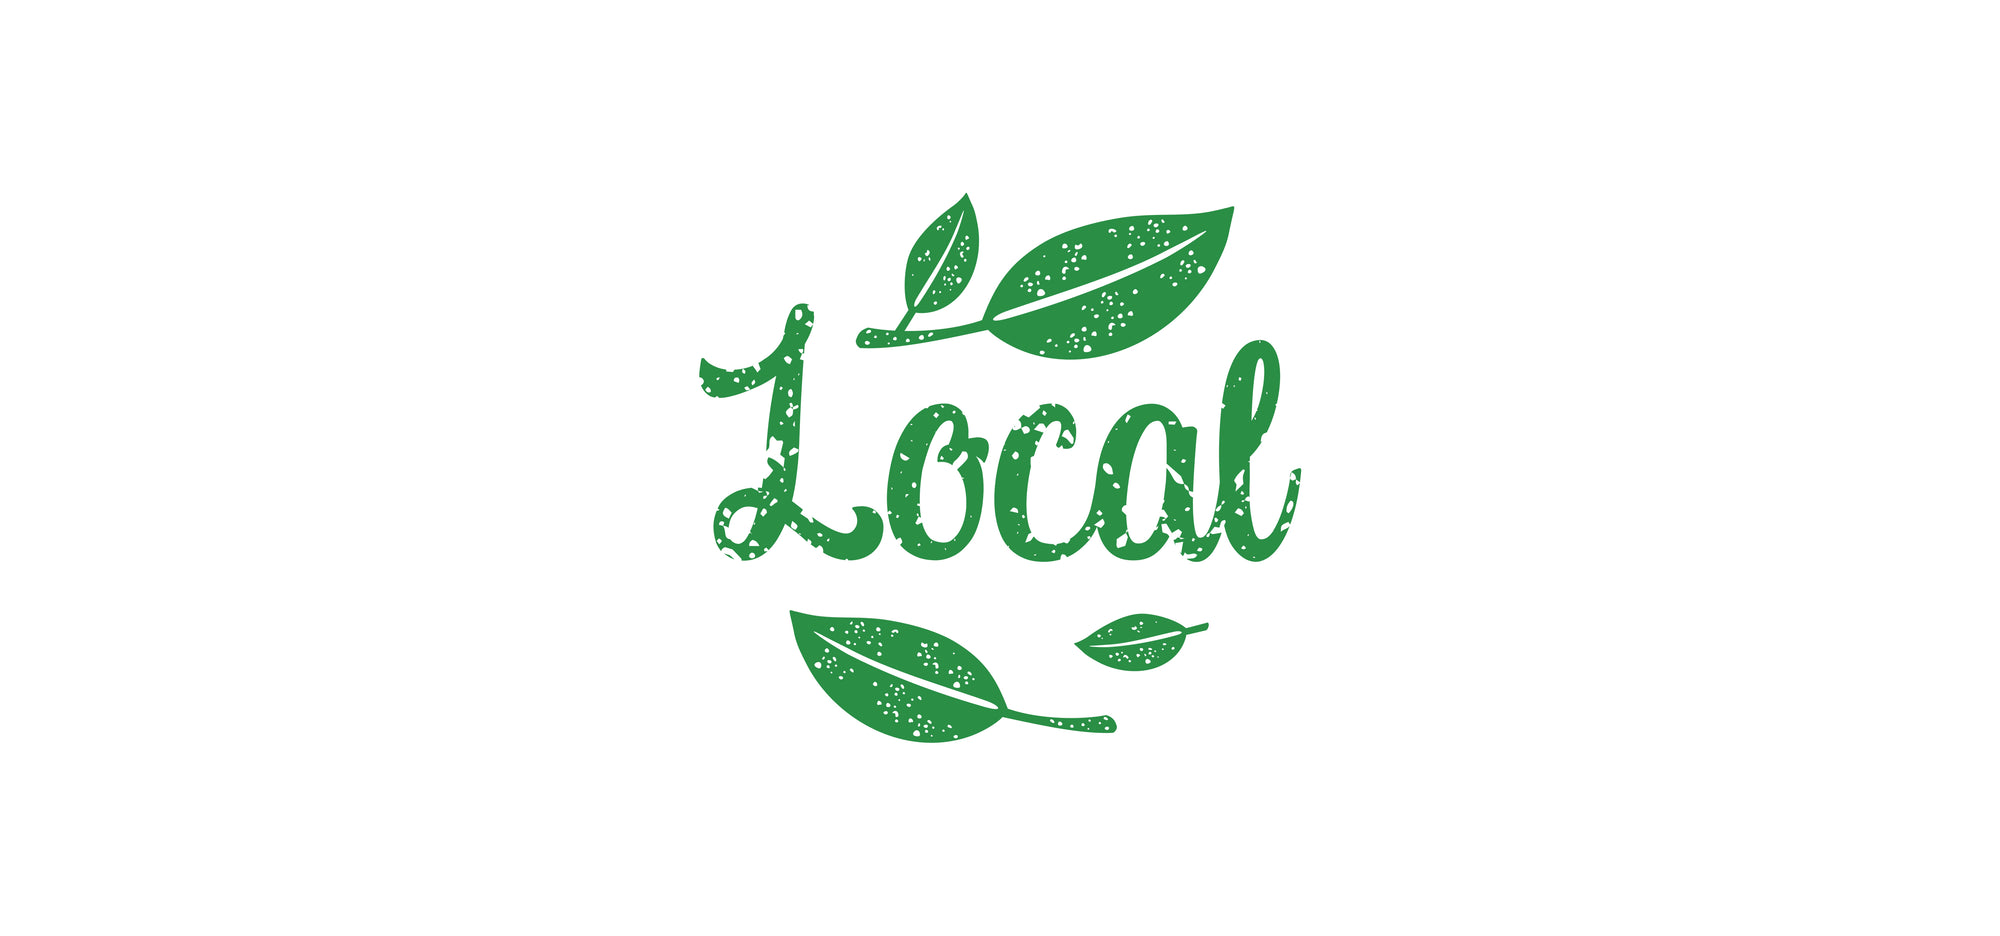 We're joining the "Go Local" movement to help decrease our carbon footprint and support resilient communities.